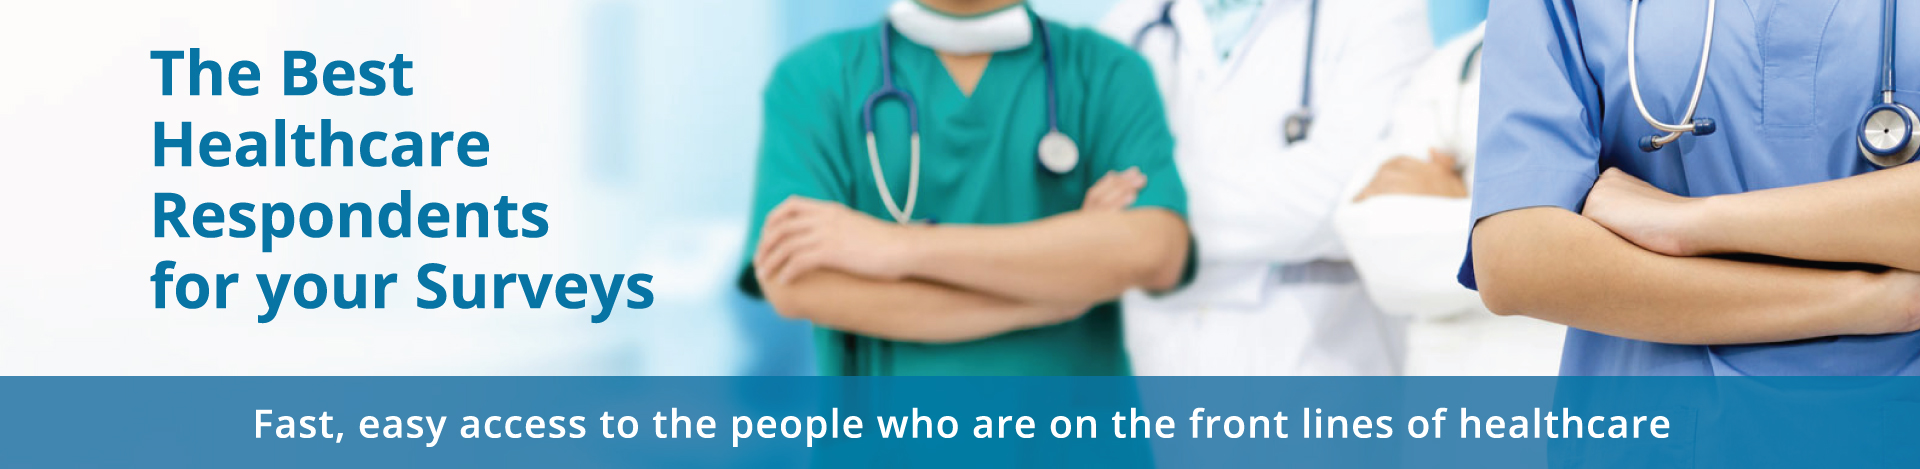 The Best Healthcare Respondents for your Surveys. Fast, easy access to the people who are on the front lines of healthcare